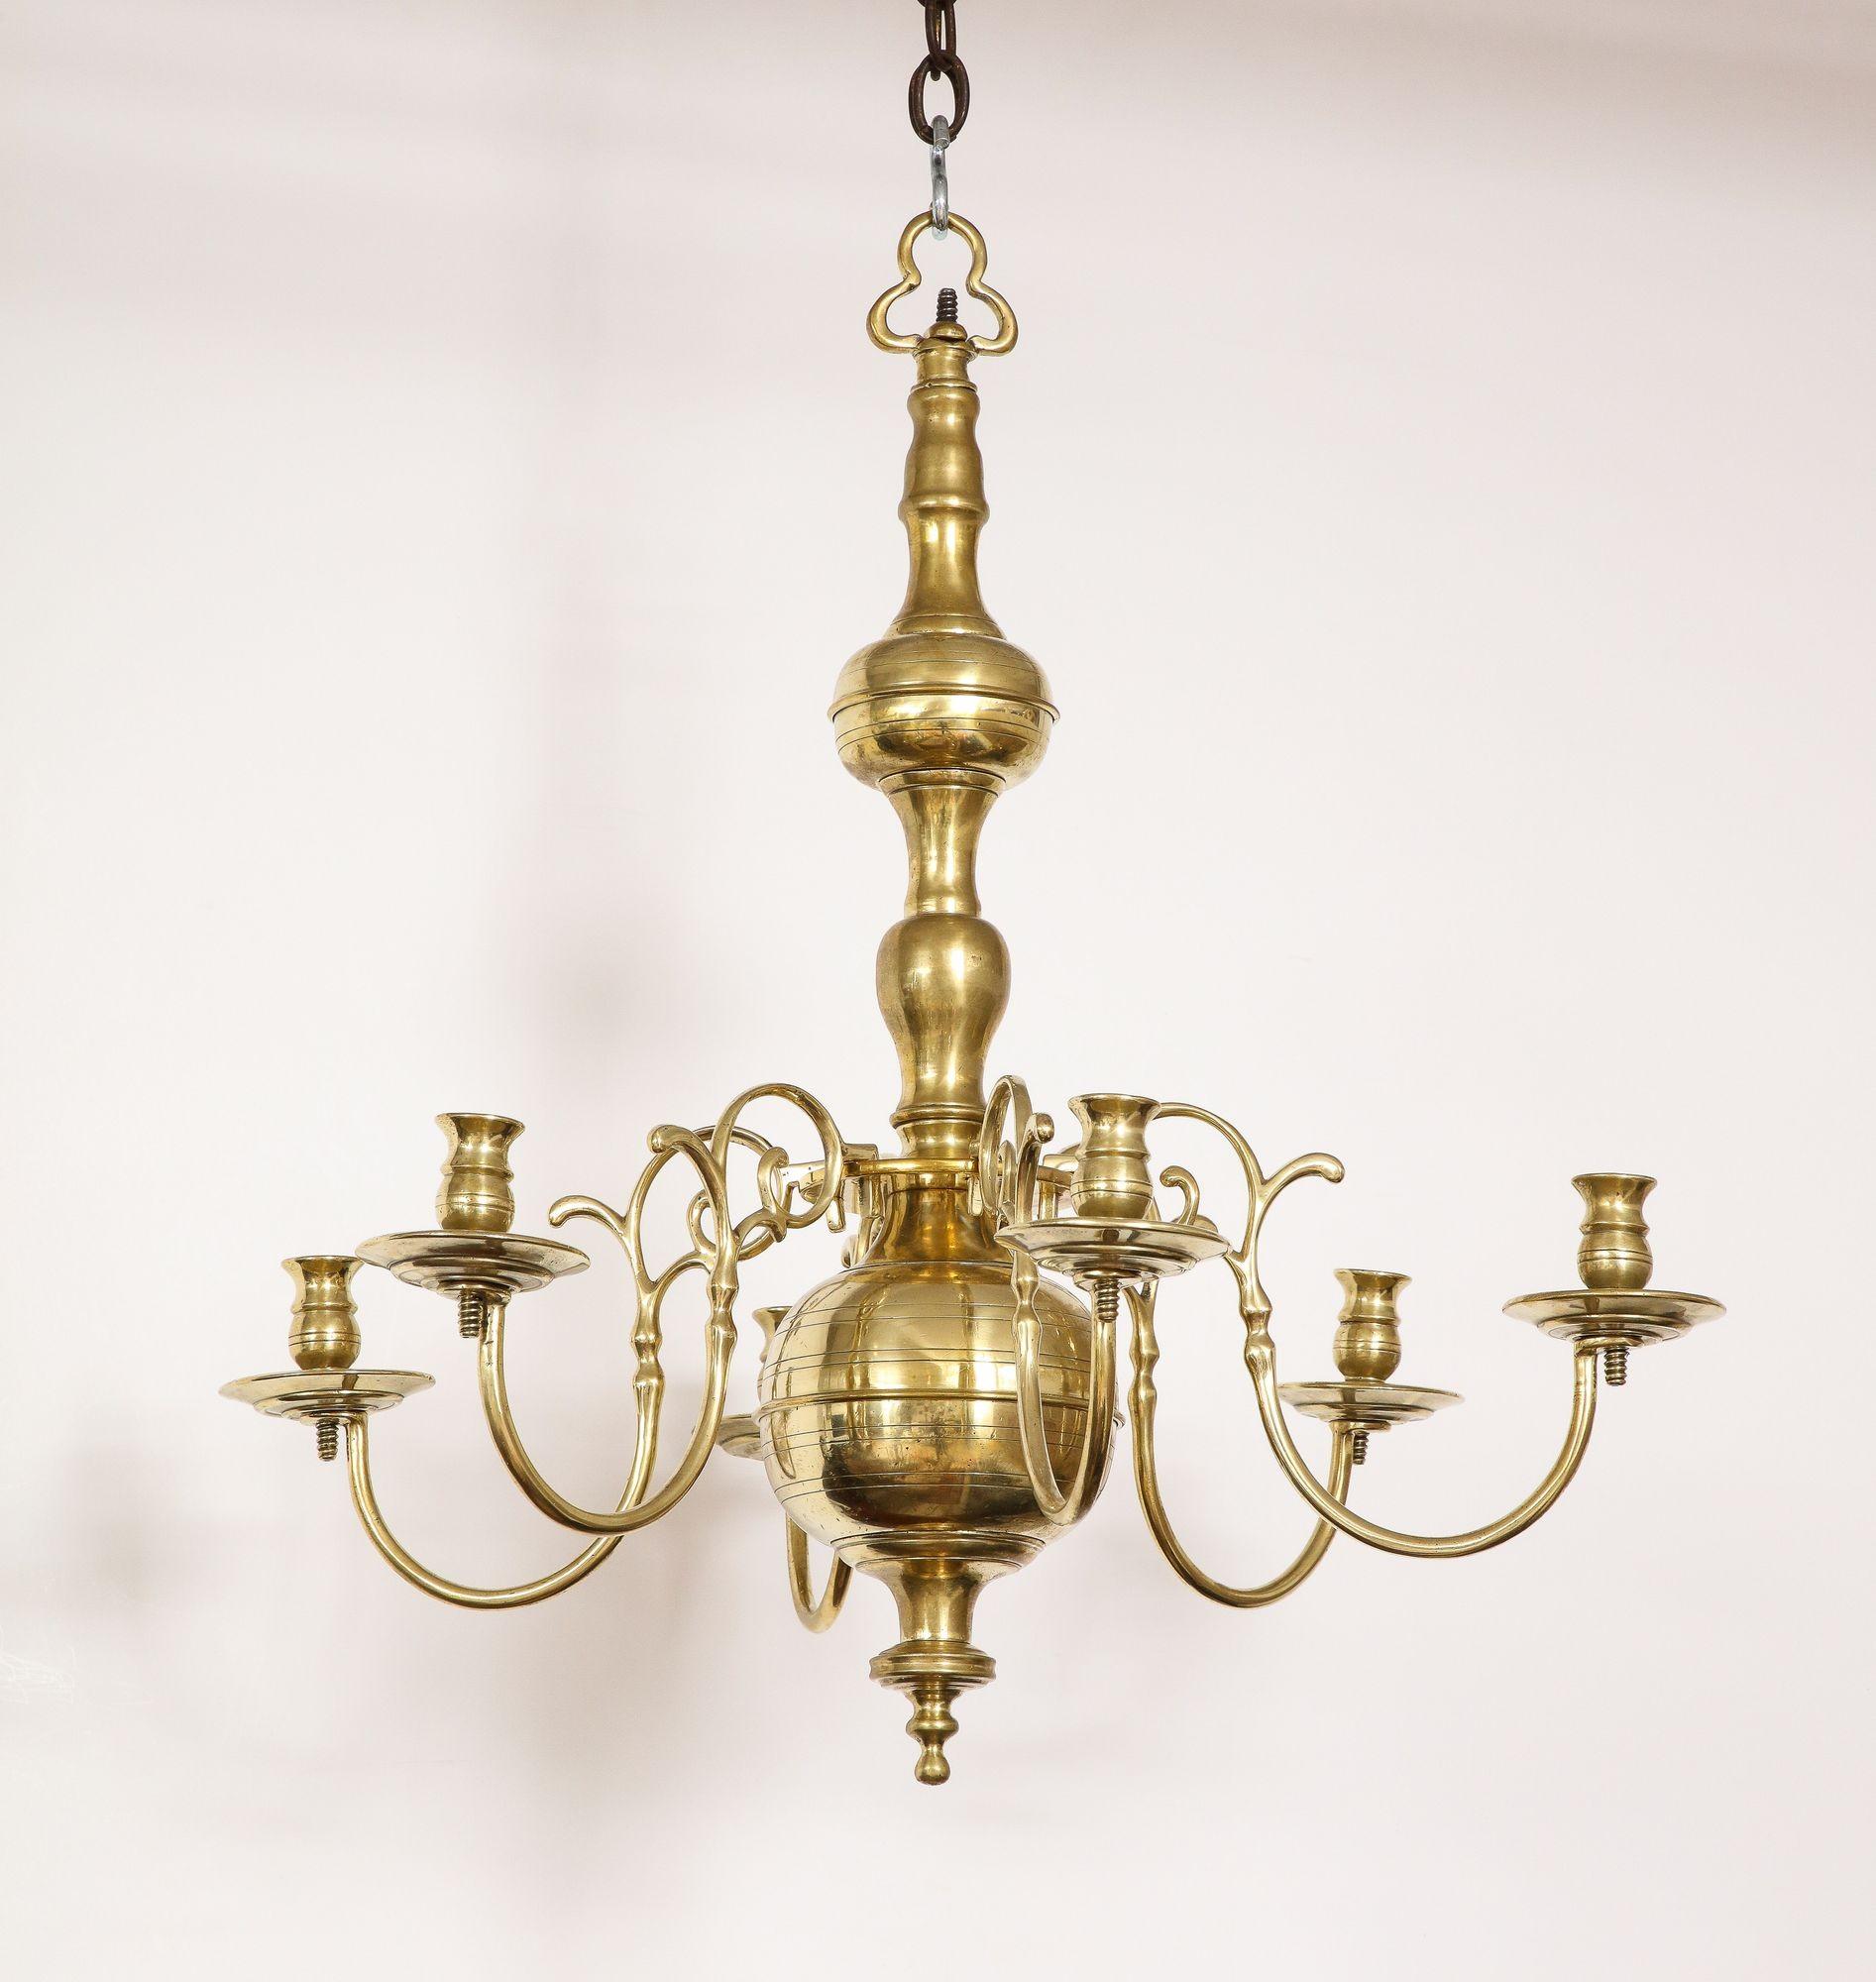 Fine 18th century brass six-light chandelier having ball and ring turned shaft with six curved arms ending in original brass candle sockets.